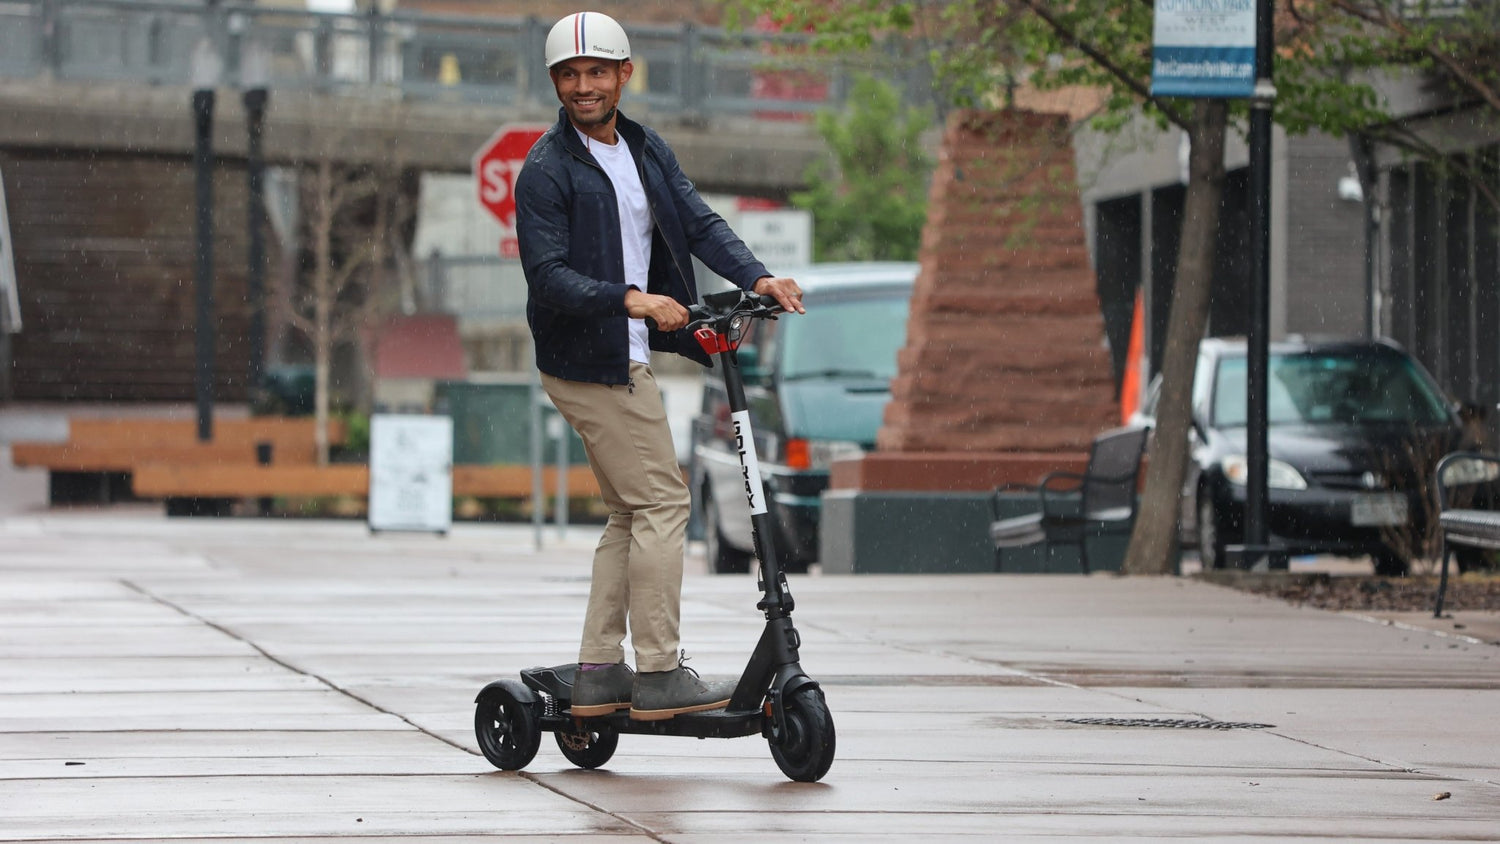 The Ultimate Guide to Electric Scooter IP Ratings - Rider Guide